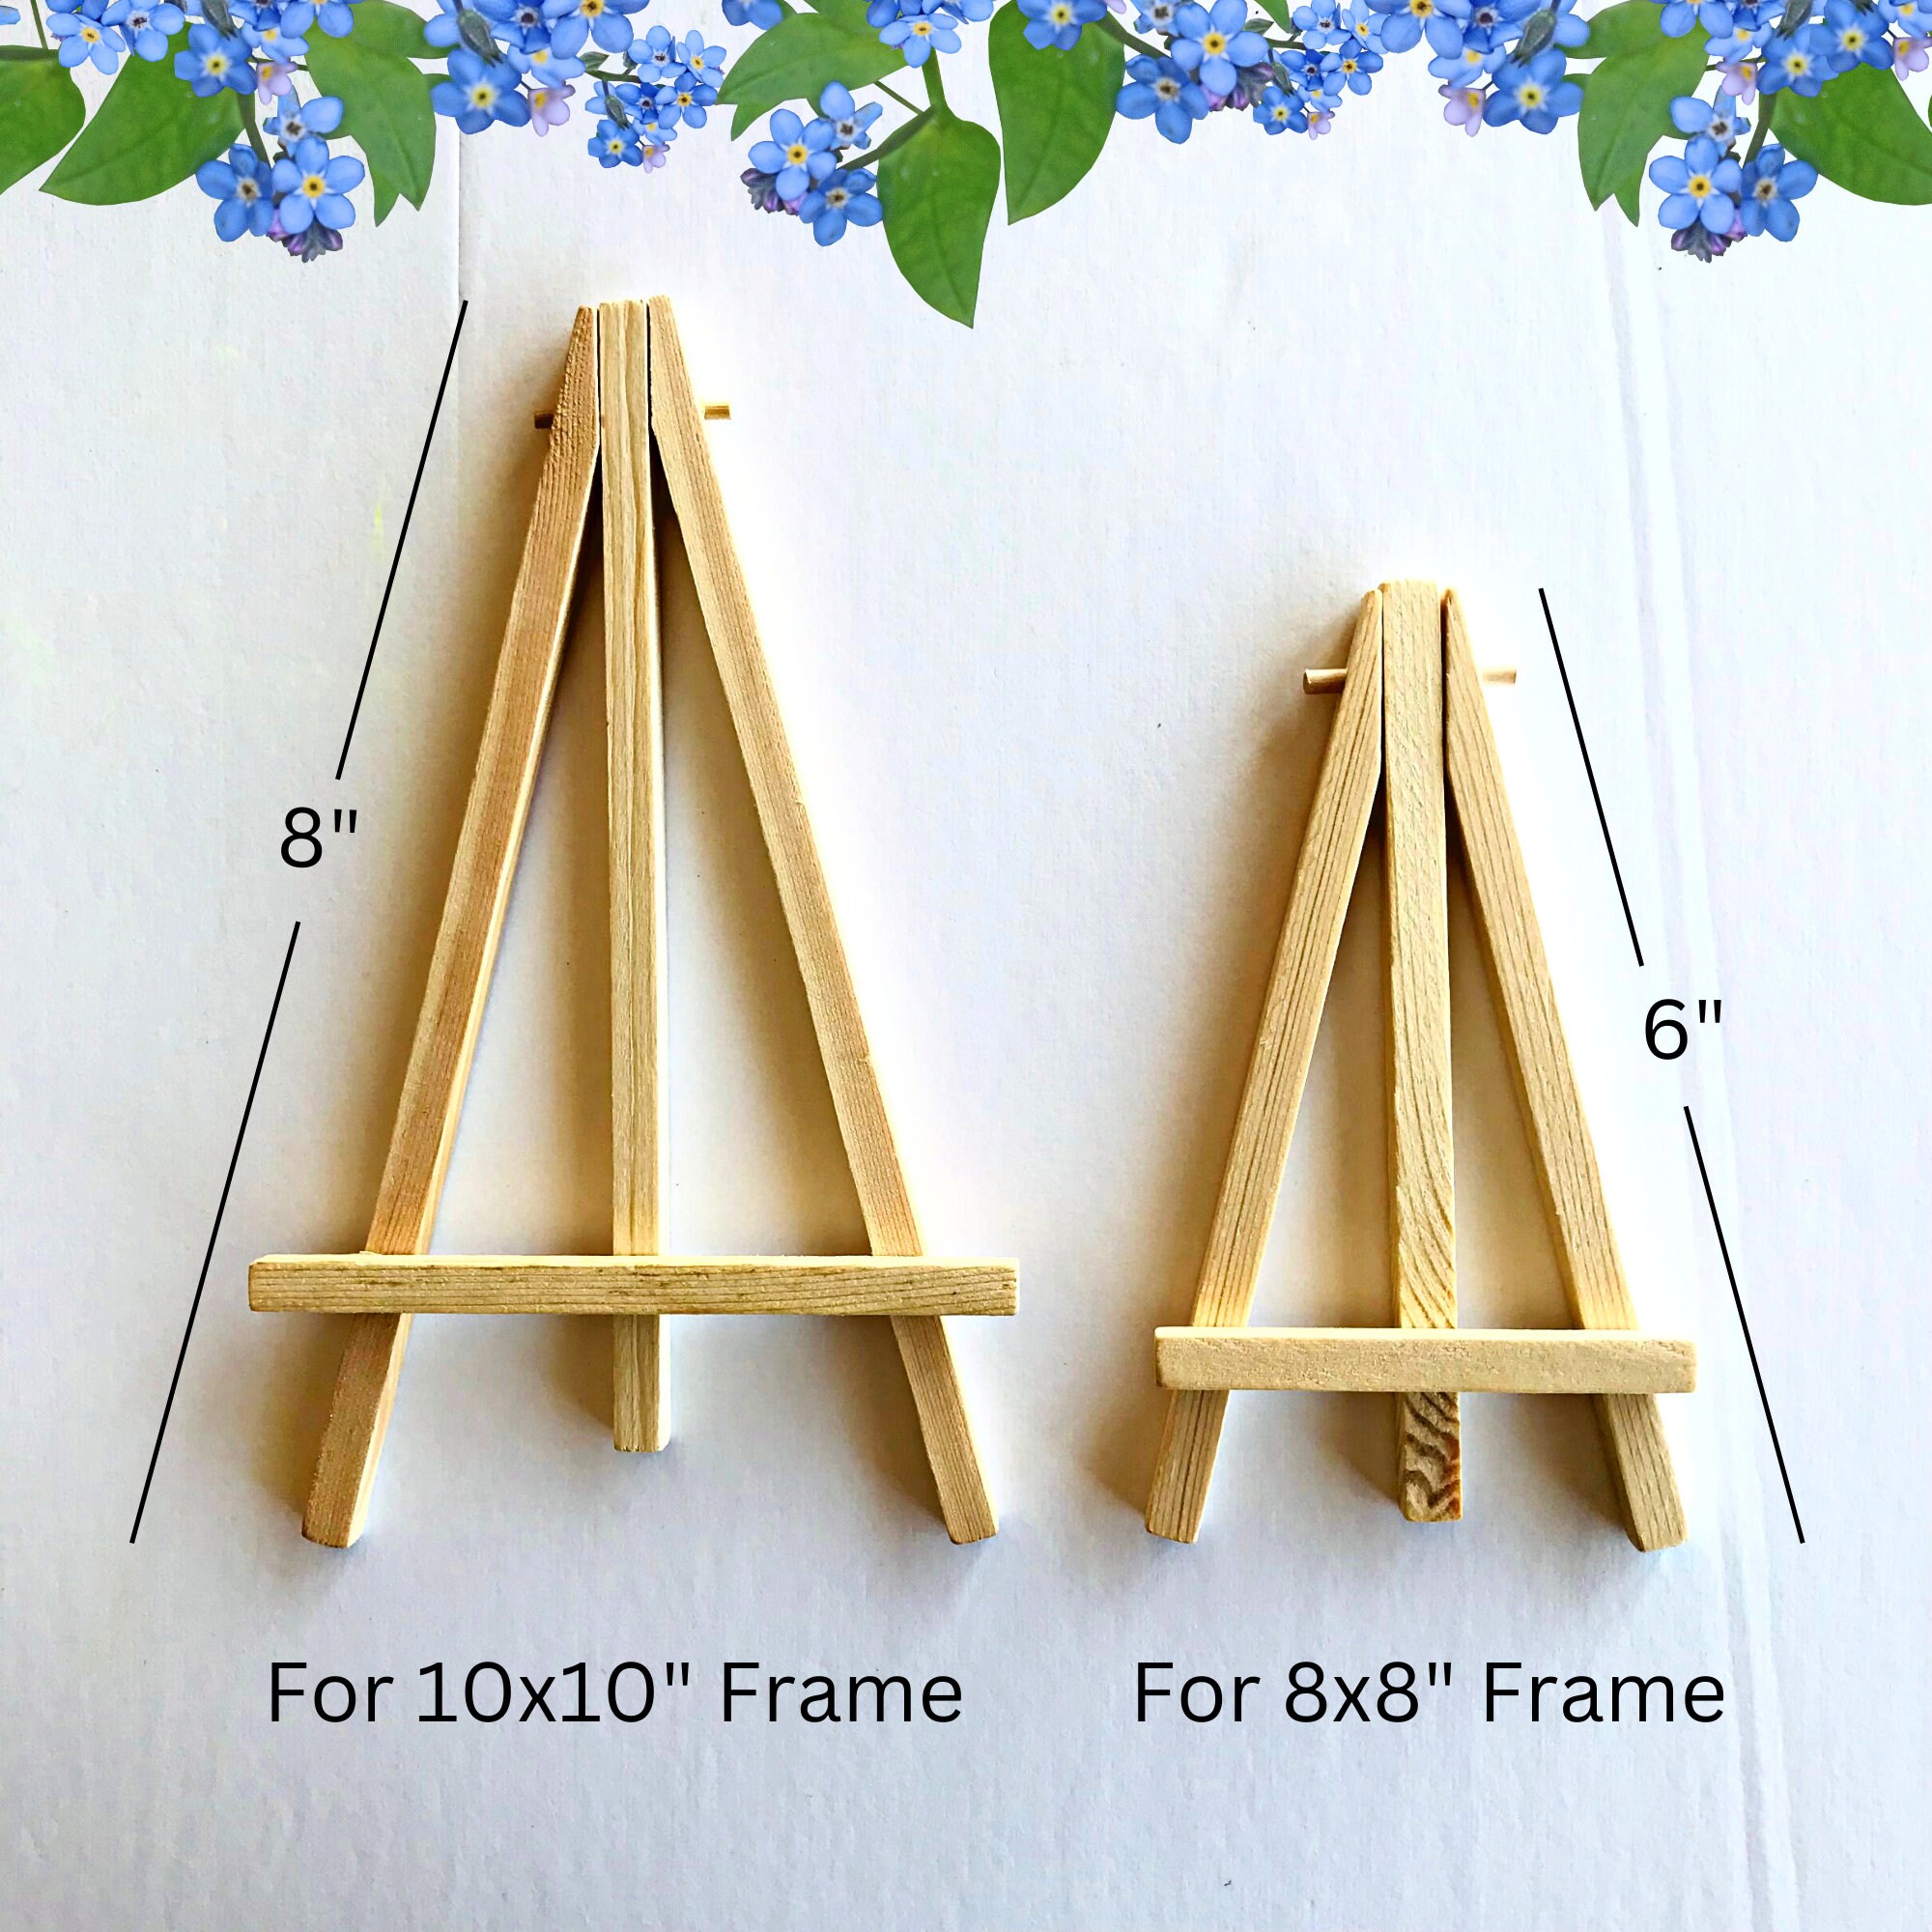 LOOGOOL Mini Easel Stand Wood DIY Embroidery Hoop Wooden Base Holder  Tabletop Display Easel Accessories Embroidery Cross Stitch Standing Decor 5